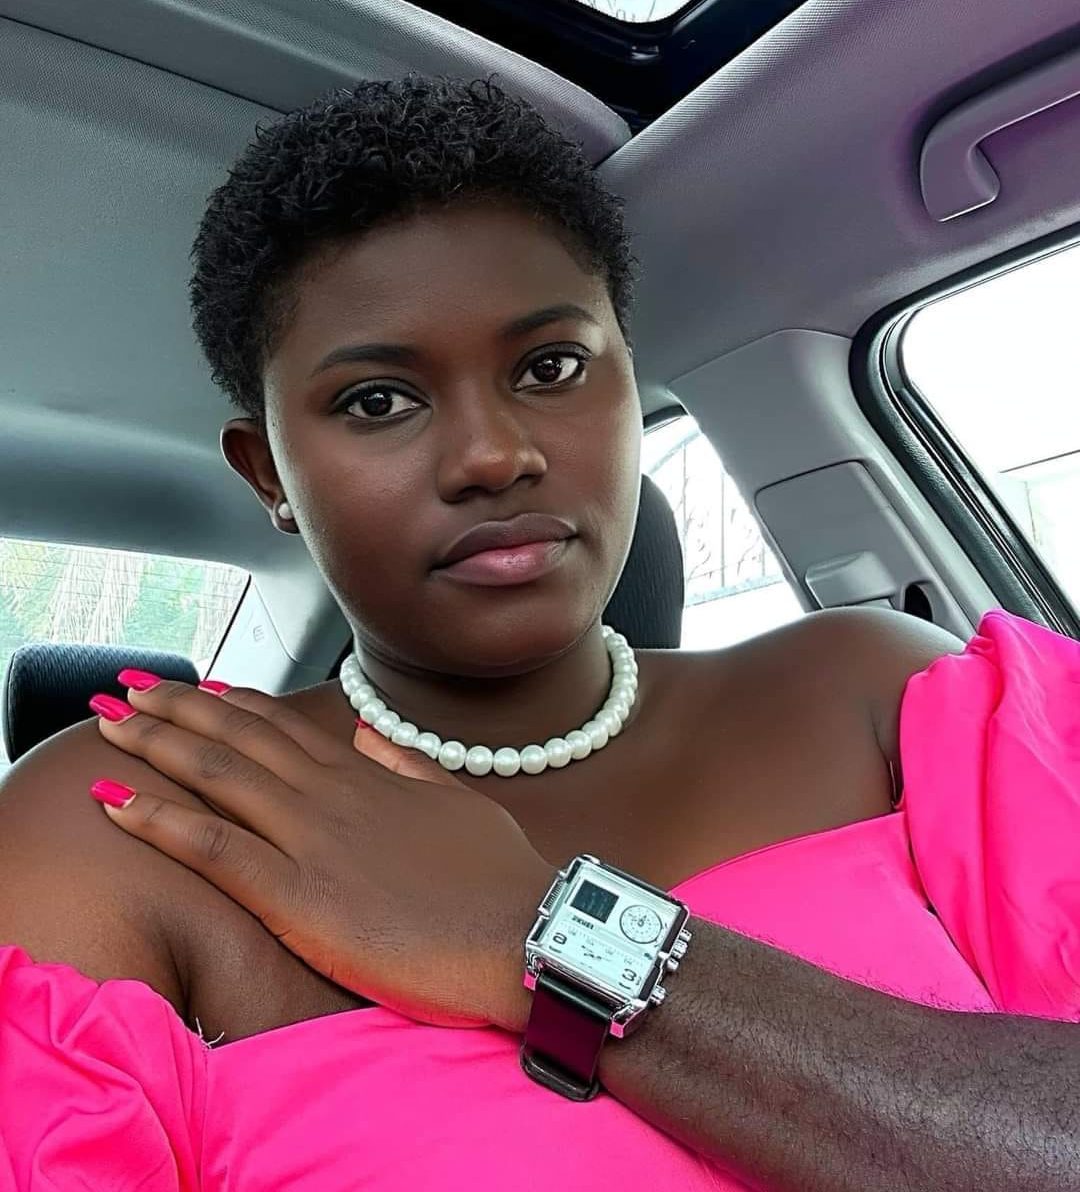 Afua Asantewaa Aduonum, Ghanaian journalist who is embarking on a Singathon to break the Guinness World Record for longest singing hours by an individual